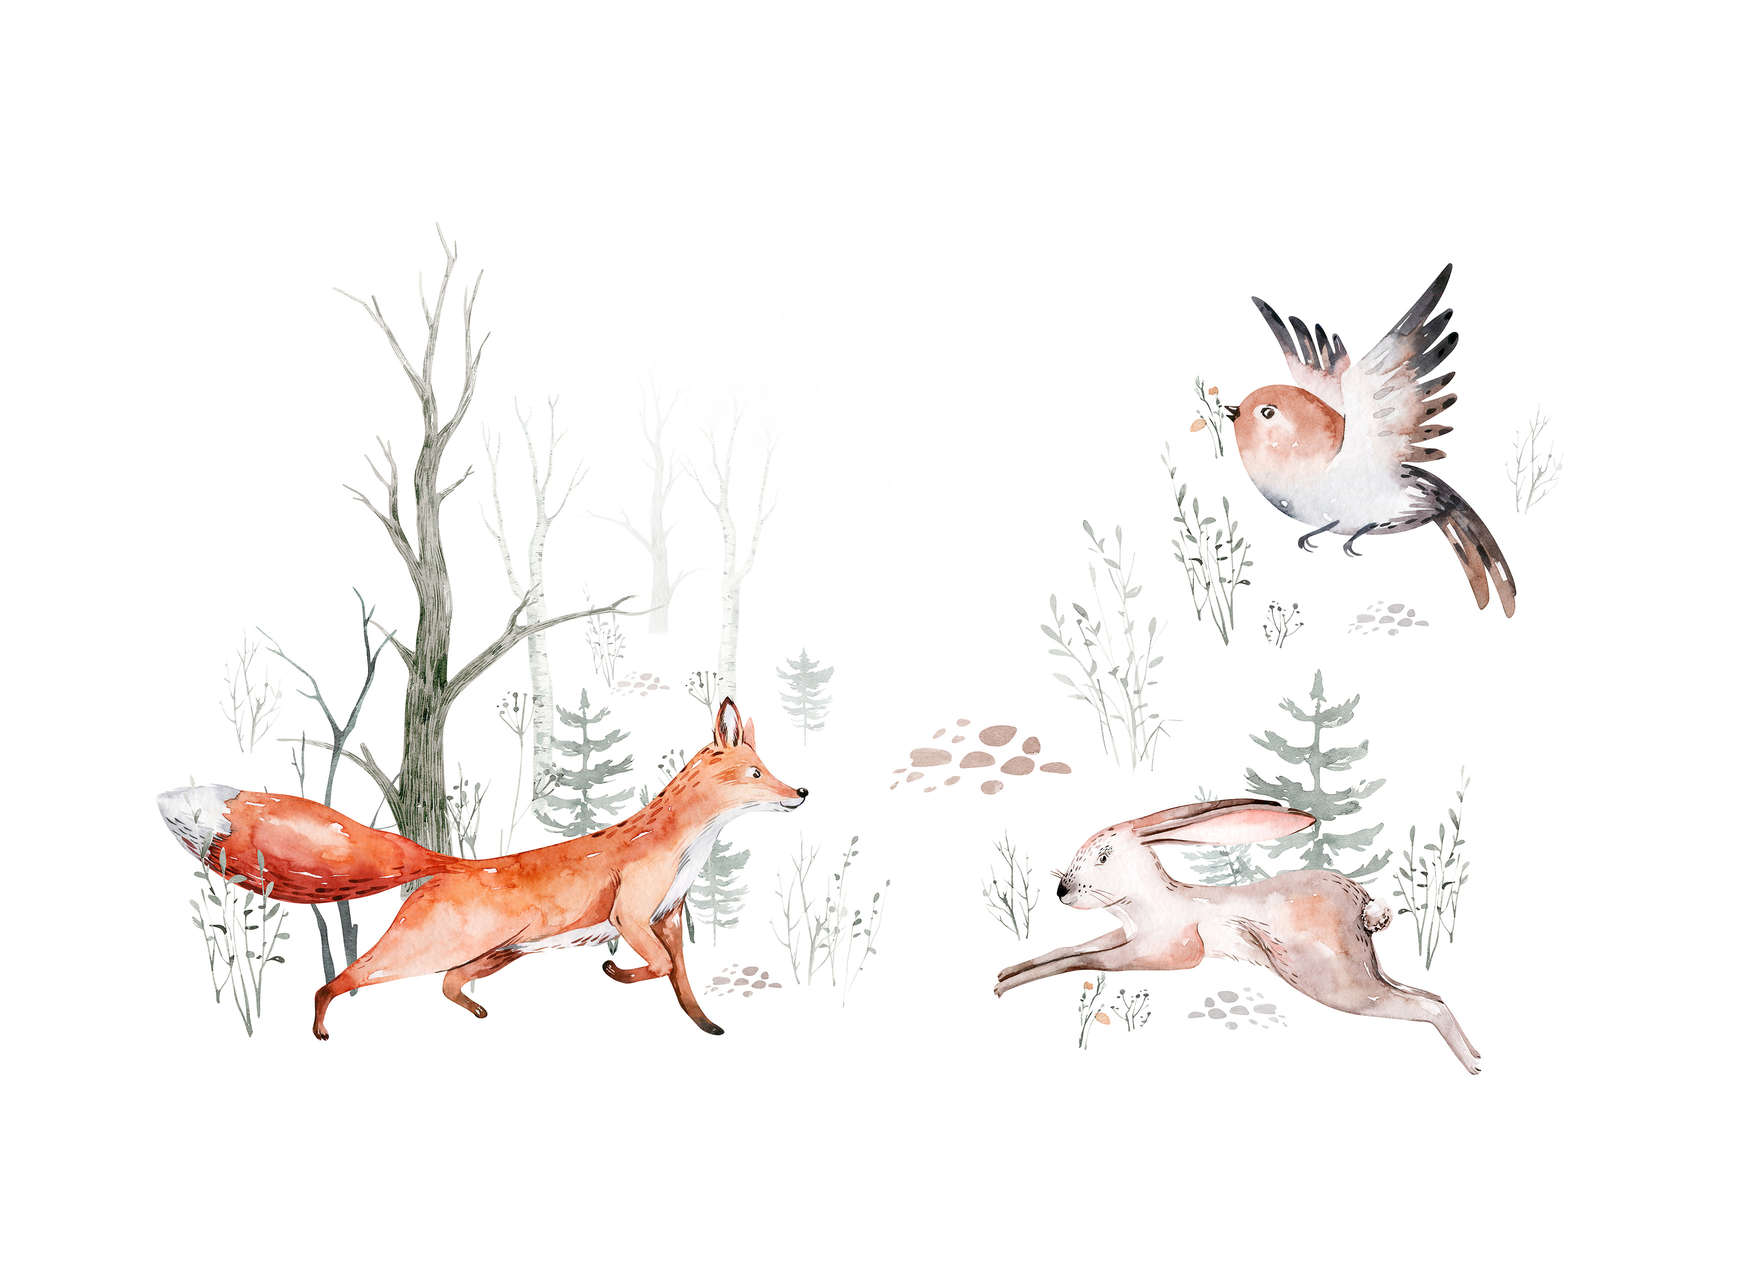             Photo wallpaper with animals in the forest for the Nursery - Orange, Green, White
        